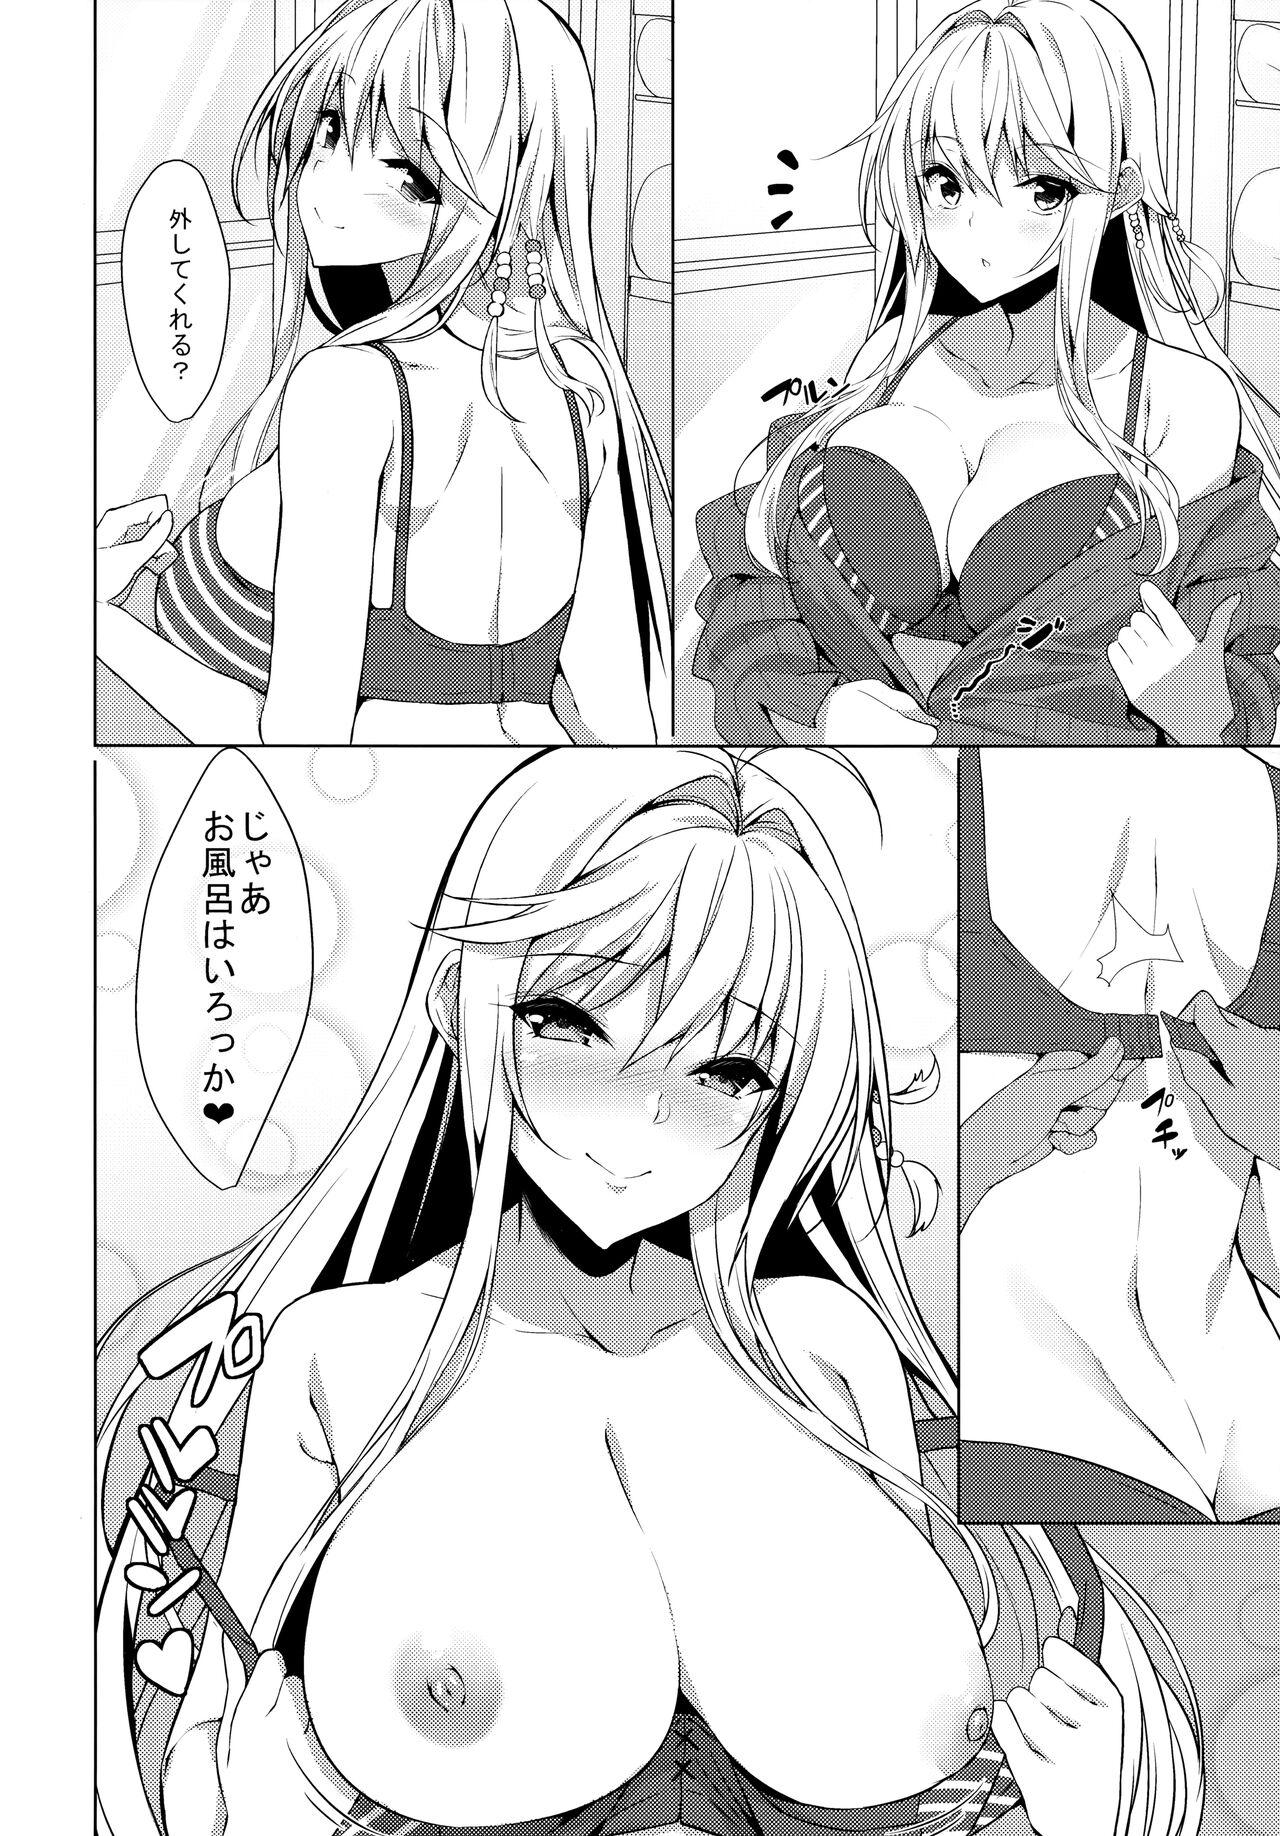 Special Locations 恋人は弦巻マキさん - Voiceroid Caliente - Page 9